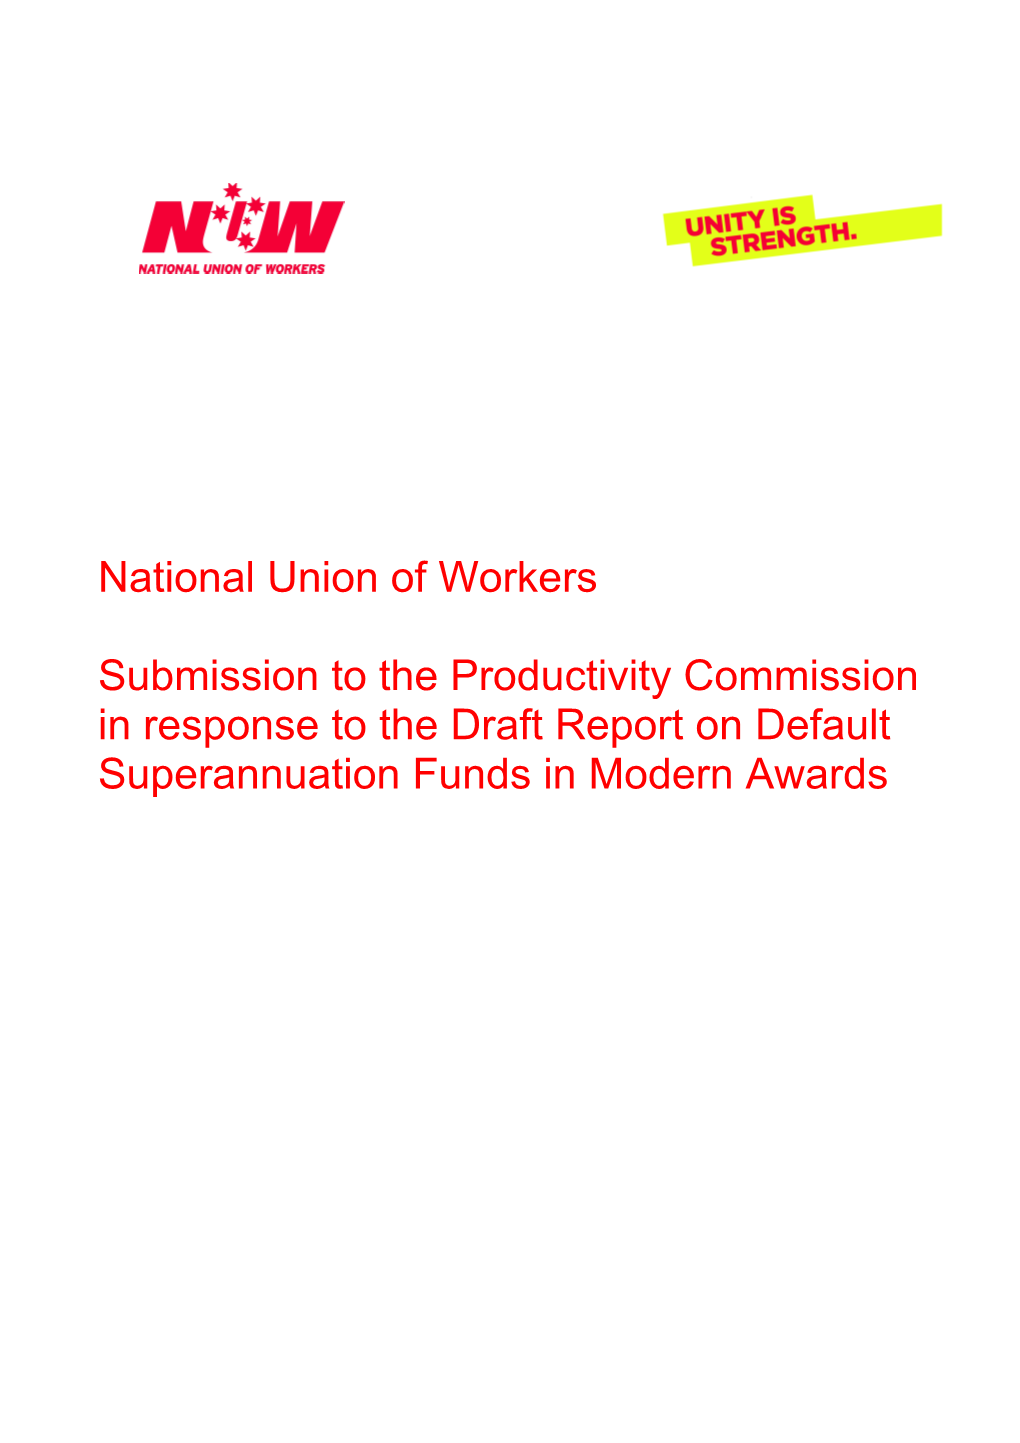 Submission DR72 - National Union of Workers - Default Superannuation Funds in Modern Awards